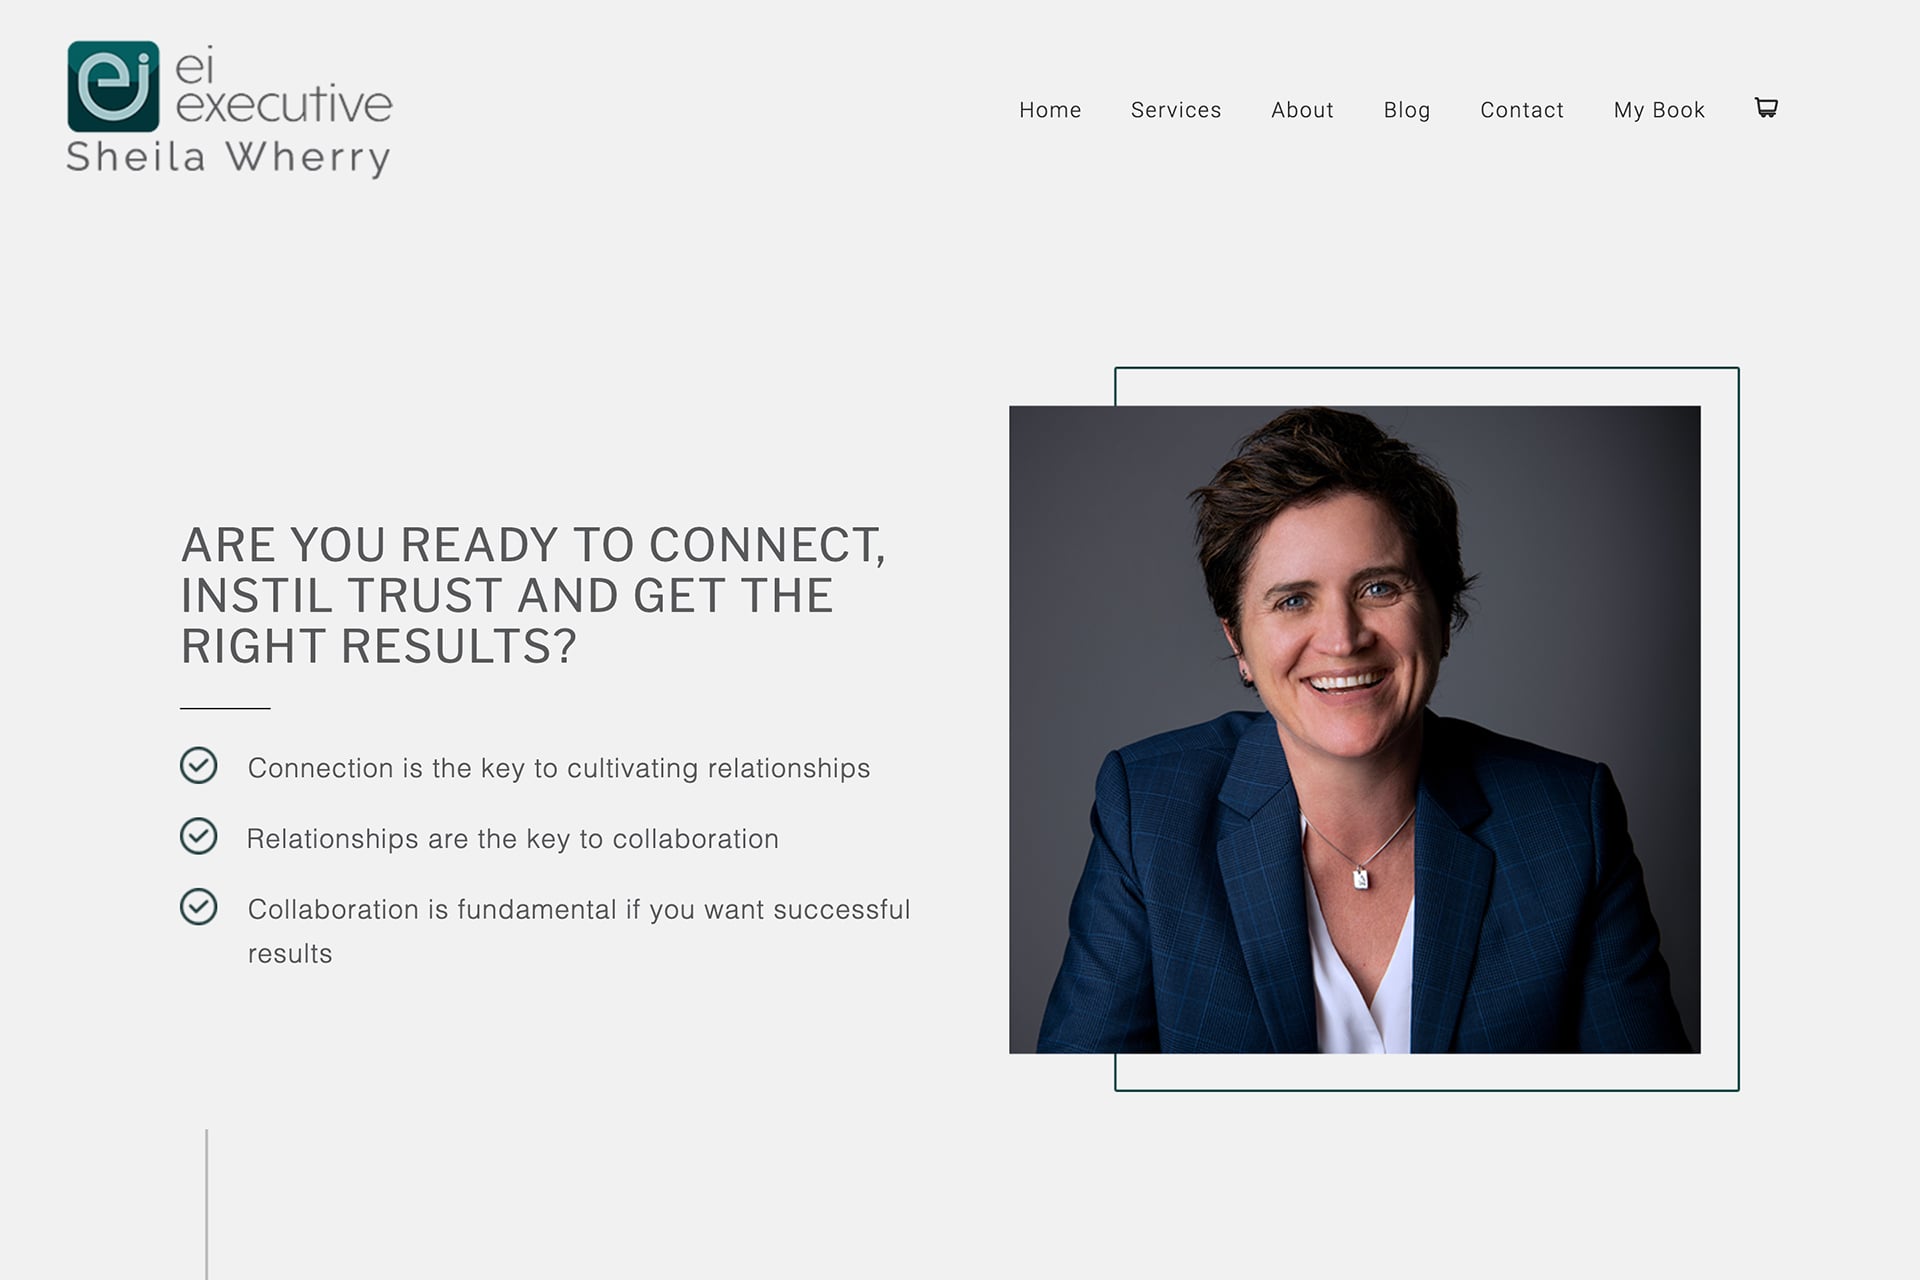 Weebly website example 31 - EI Executive